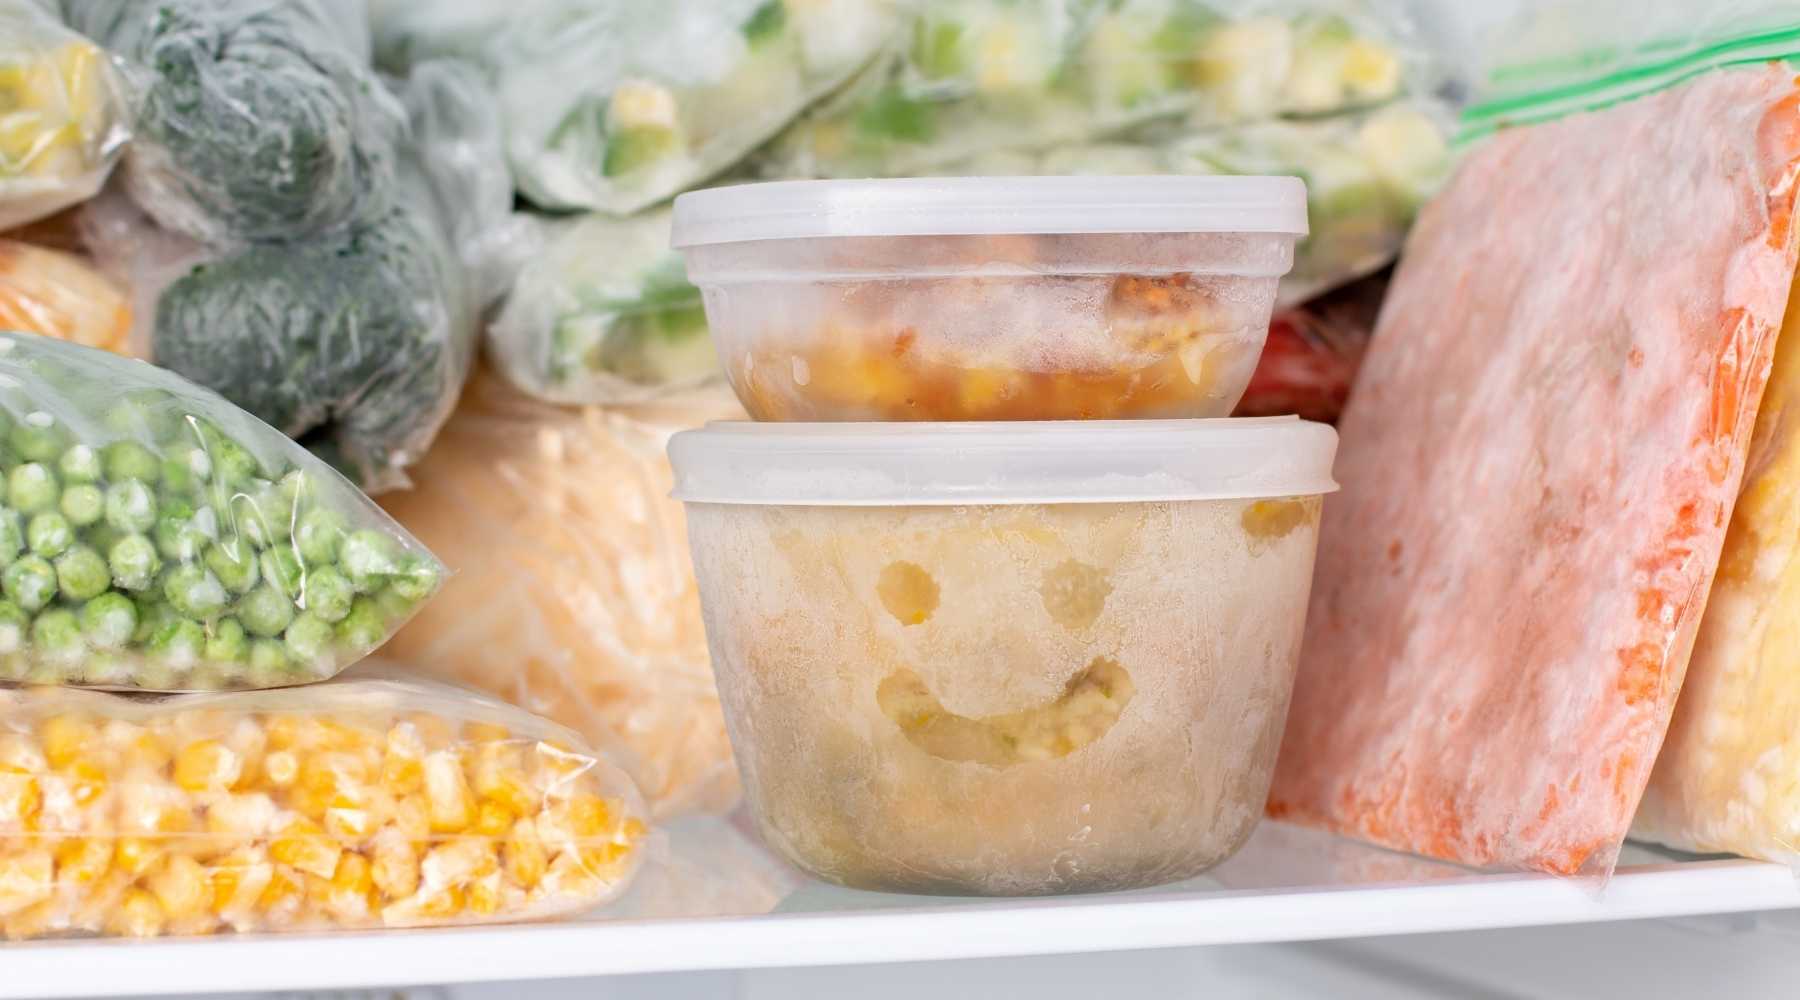 Containers for freezer meal prep